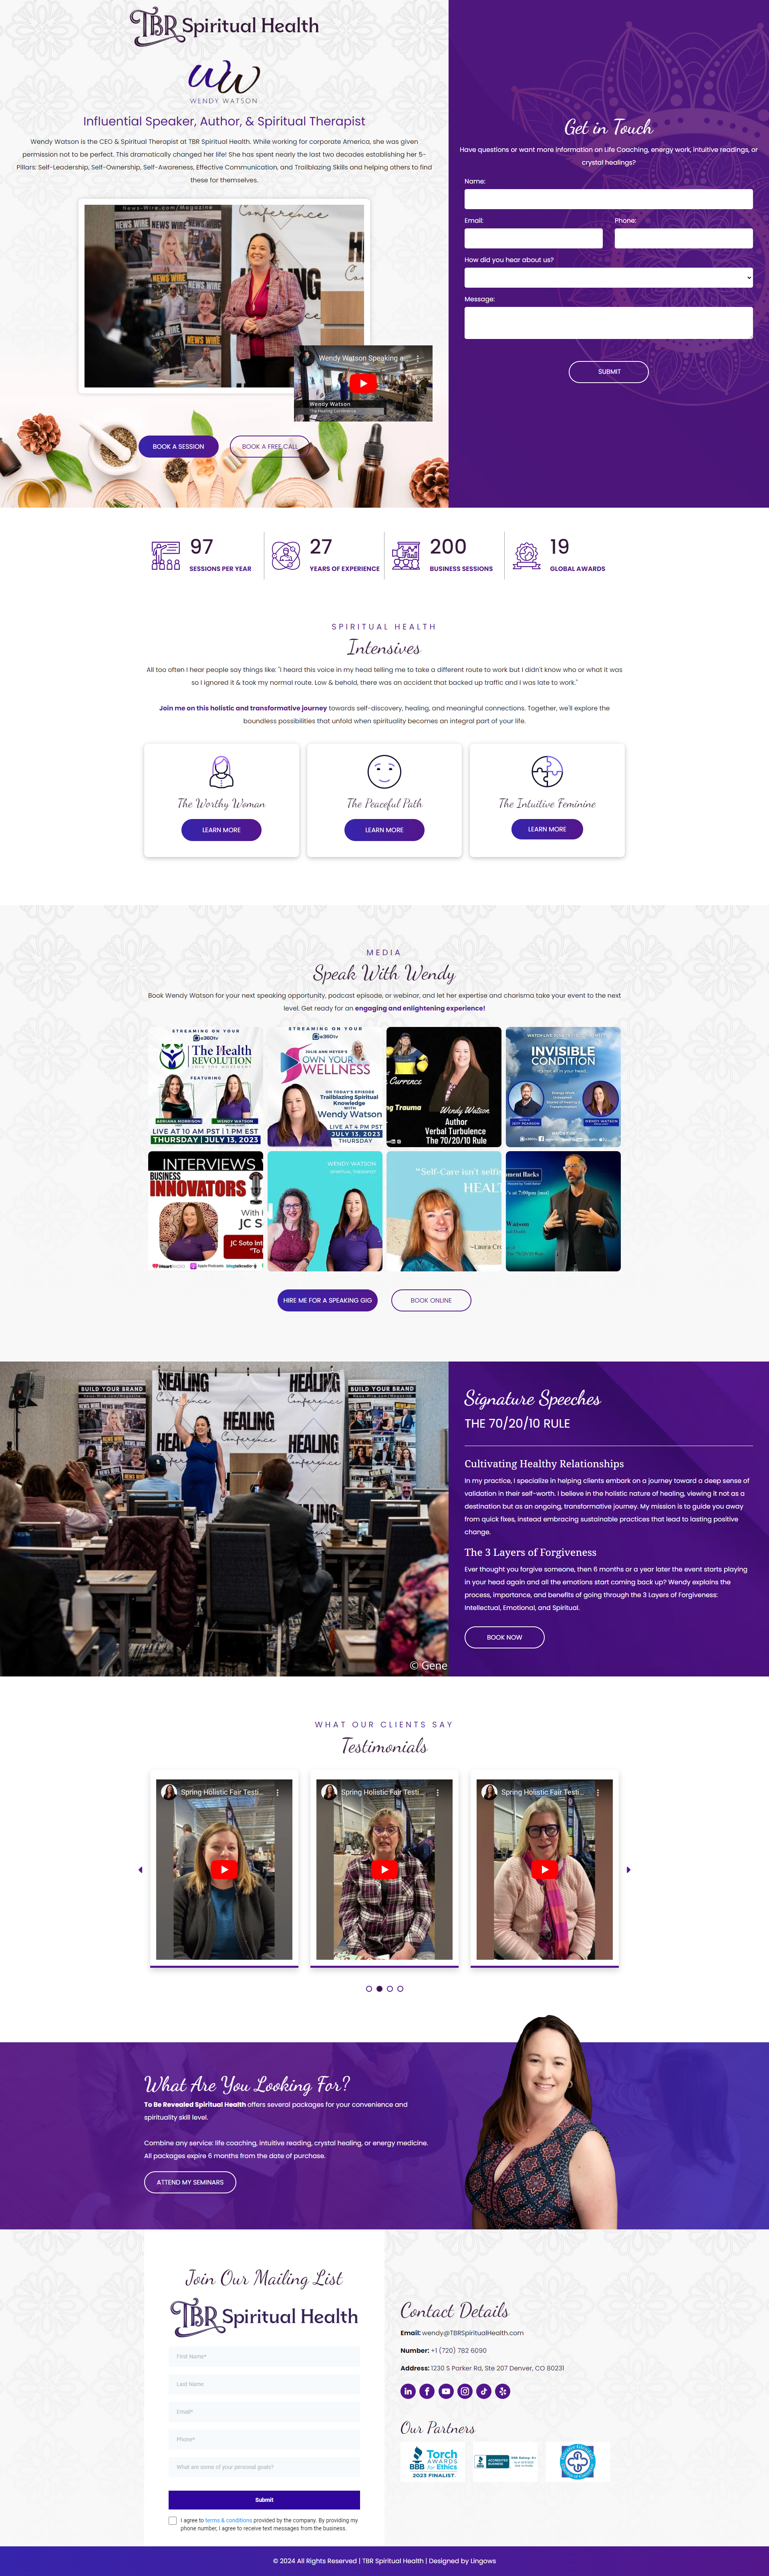 A purple and white website with a woman on it.